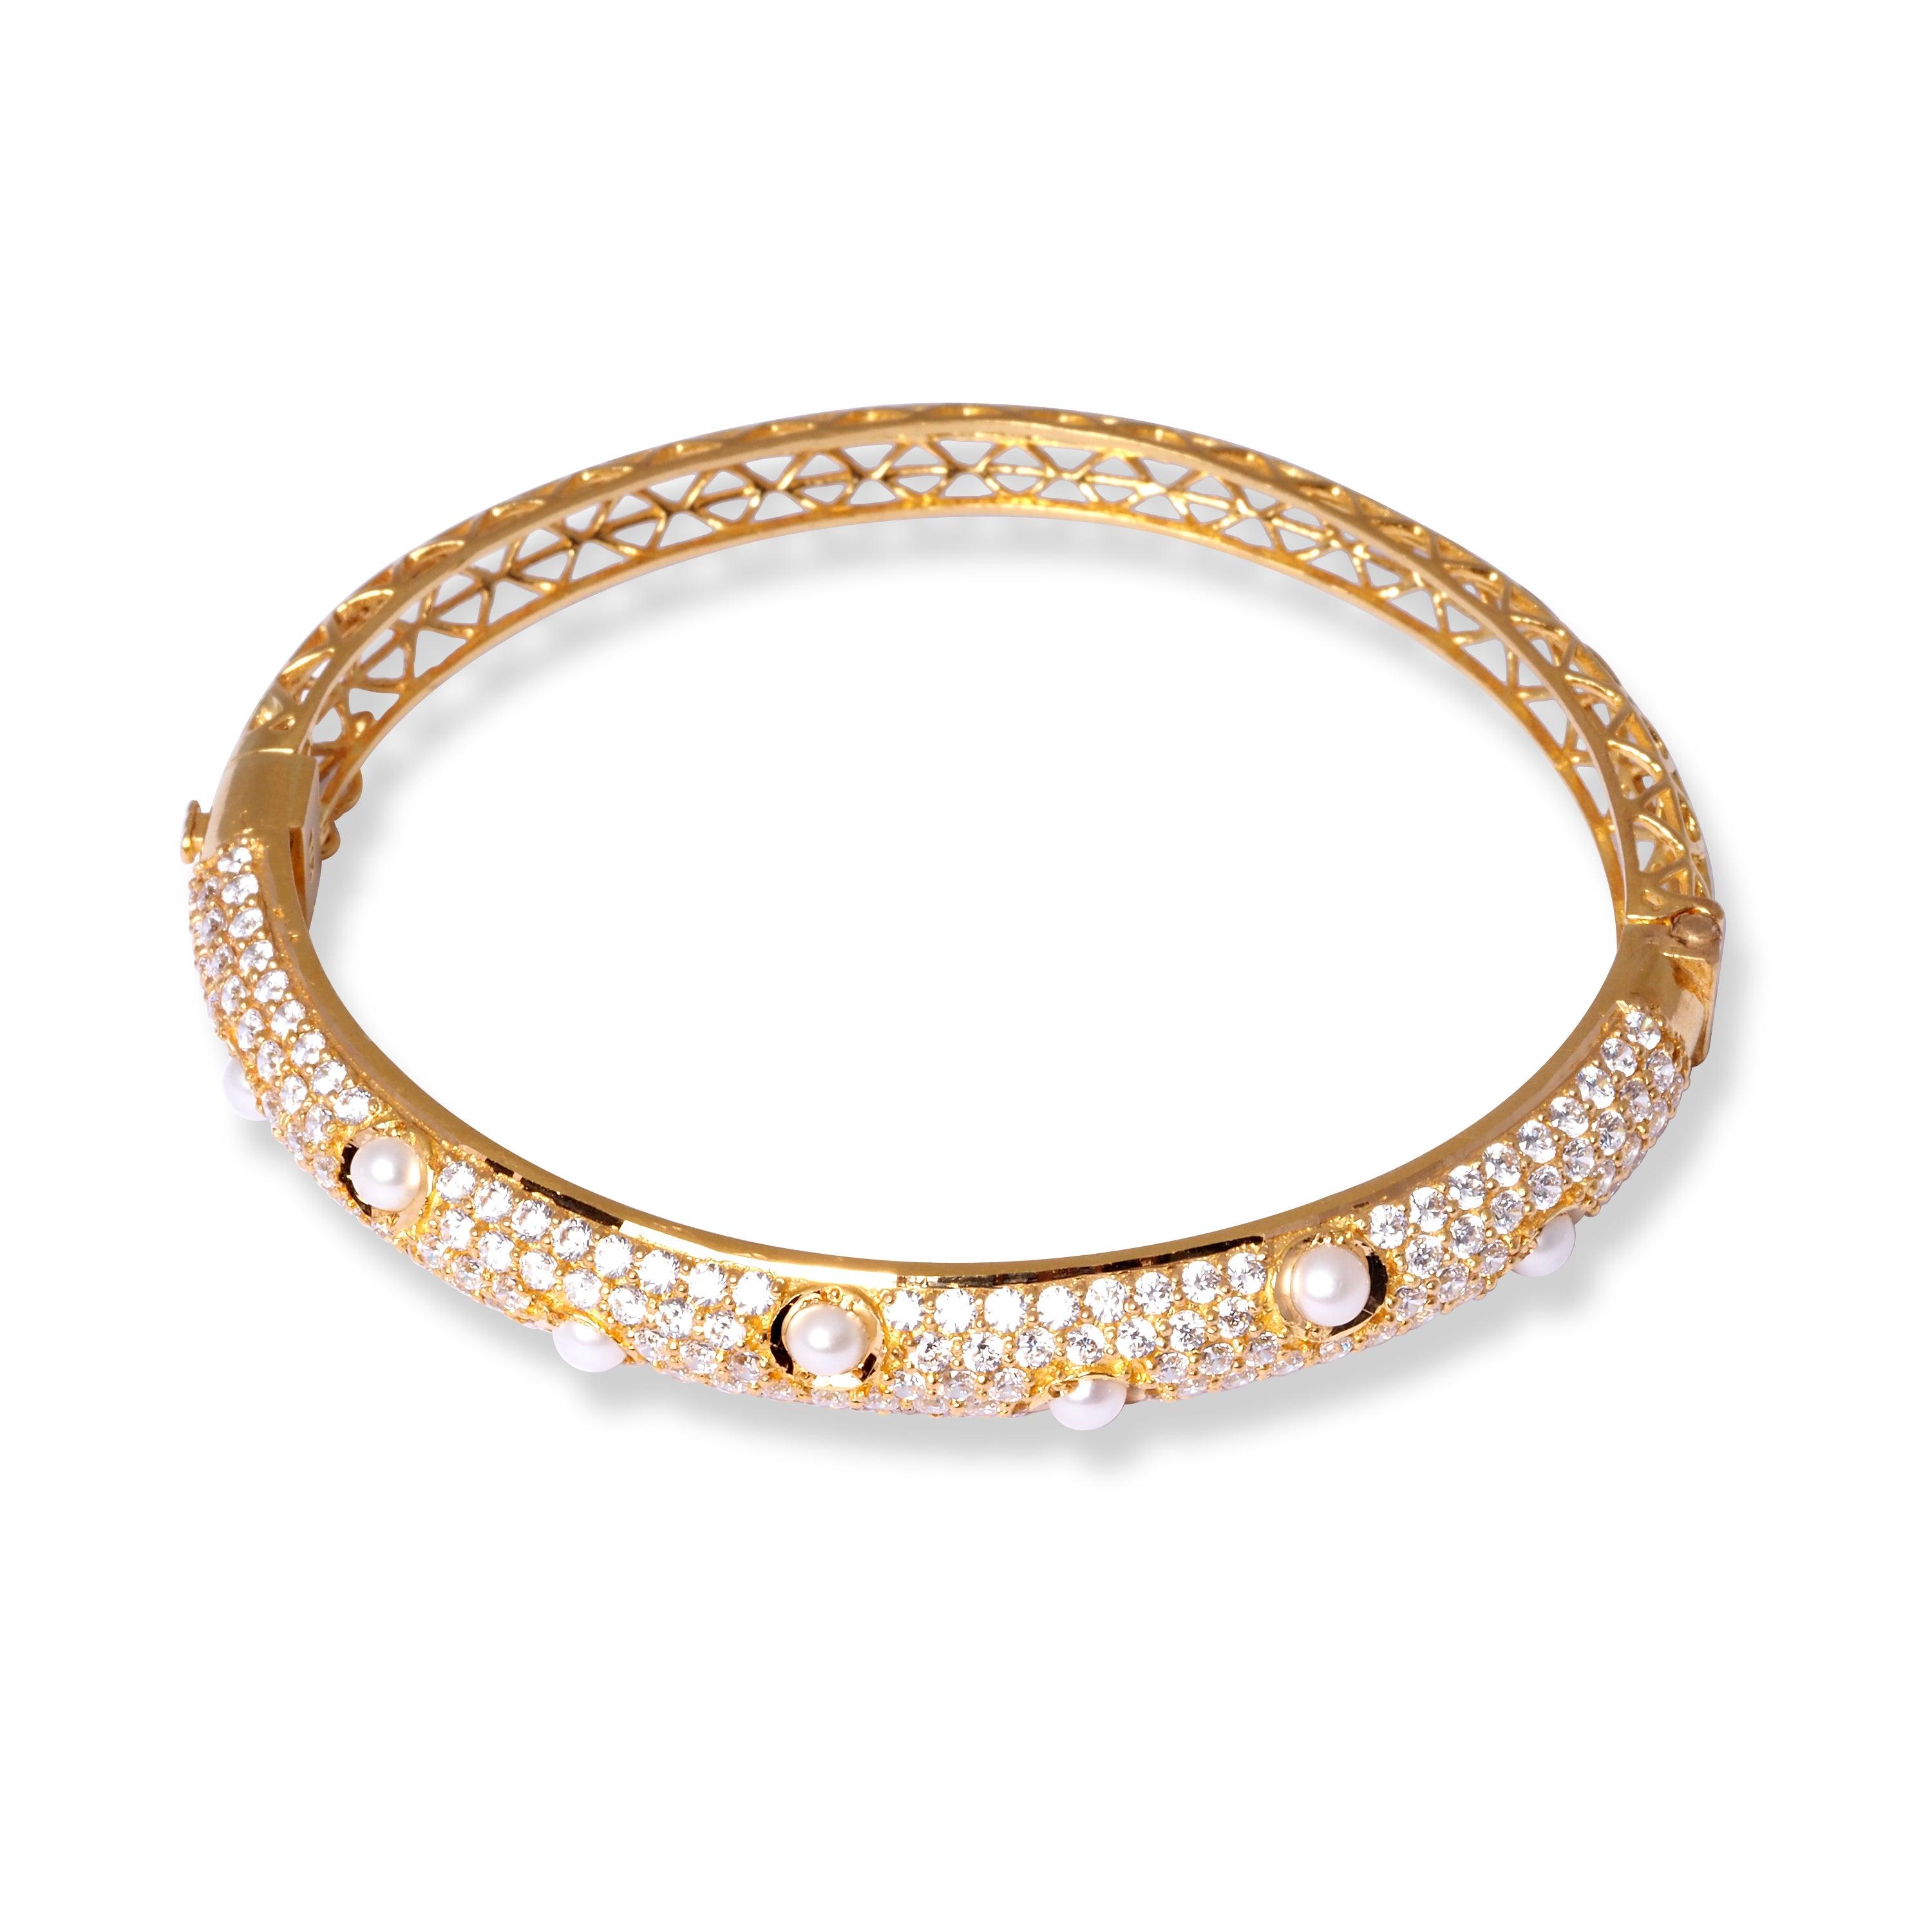 22ct Gold Openable Bangle with Cultured Pearls and Cubic Zirconia Stones B-8556 - Minar Jewellers